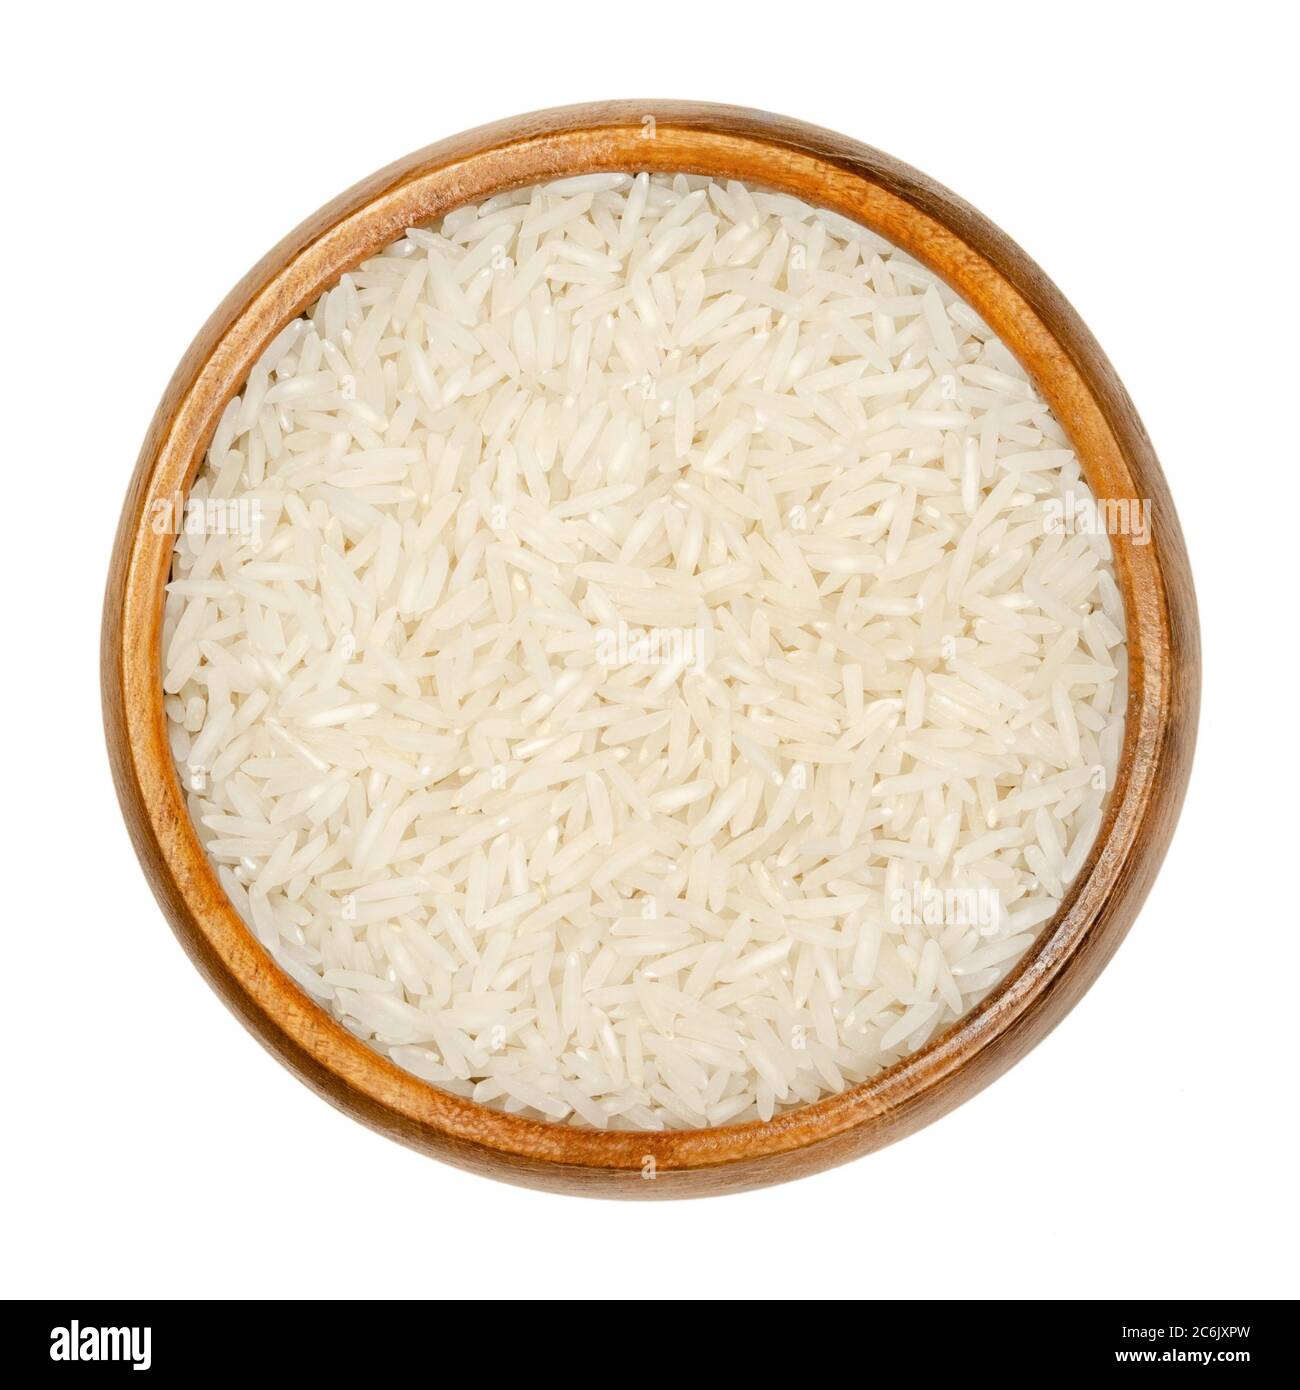 White Basmati rice in wooden bowl. Rice variety with long, slender grains and aromatic smell and taste, traditionally from Indian subcontinent. Stock Photo